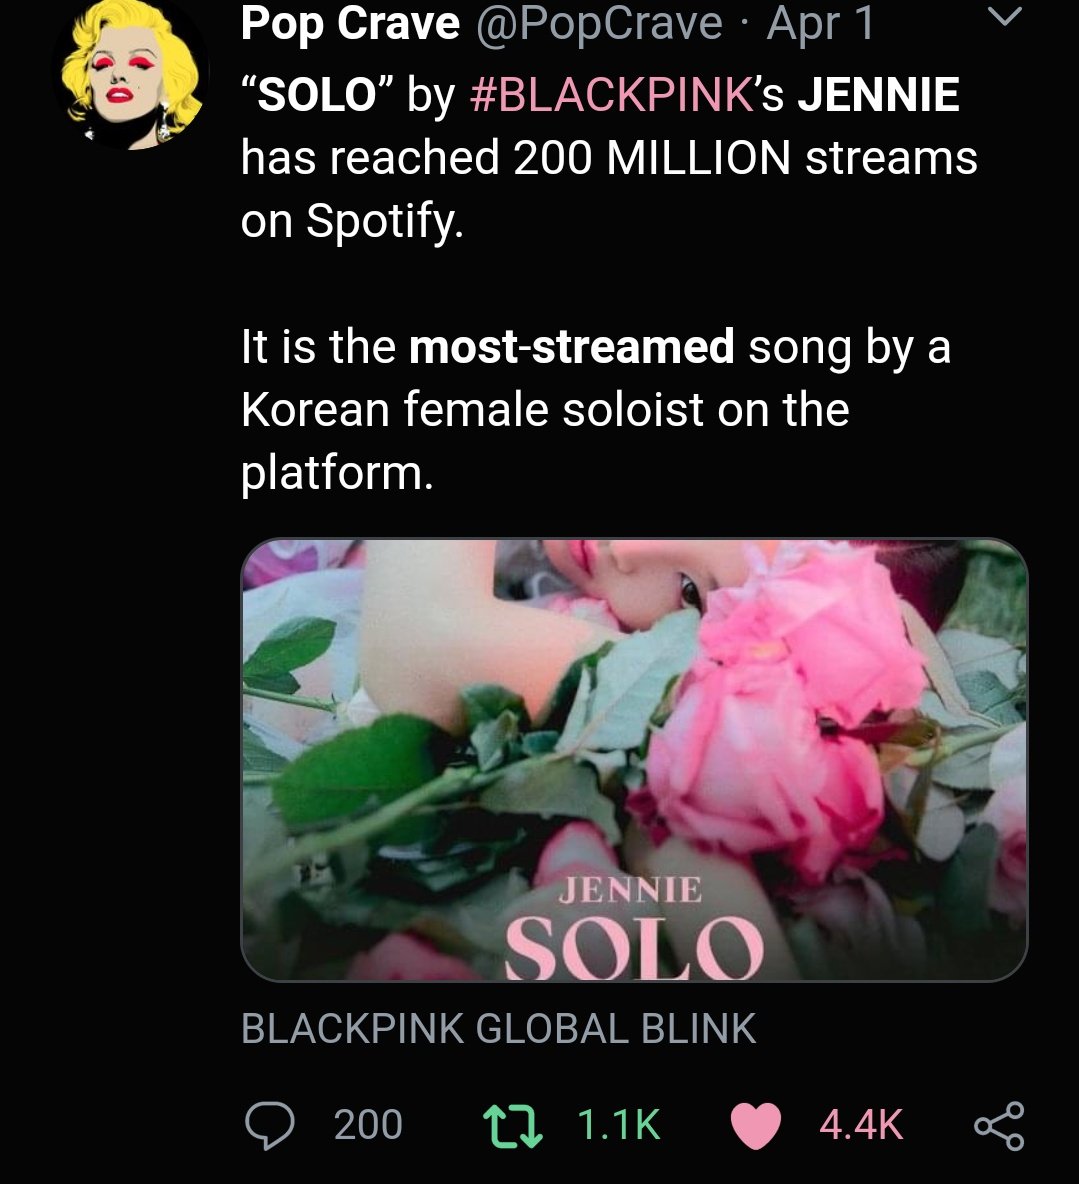 Jennie's solo is the longest charting solo song by a Korean idol on Billboard's World Digital Song Sales Chart (25 weeks), The most streamed solo song by a Korean female idol on Spotify (surpassed her own group's song) with 200m+ streams.